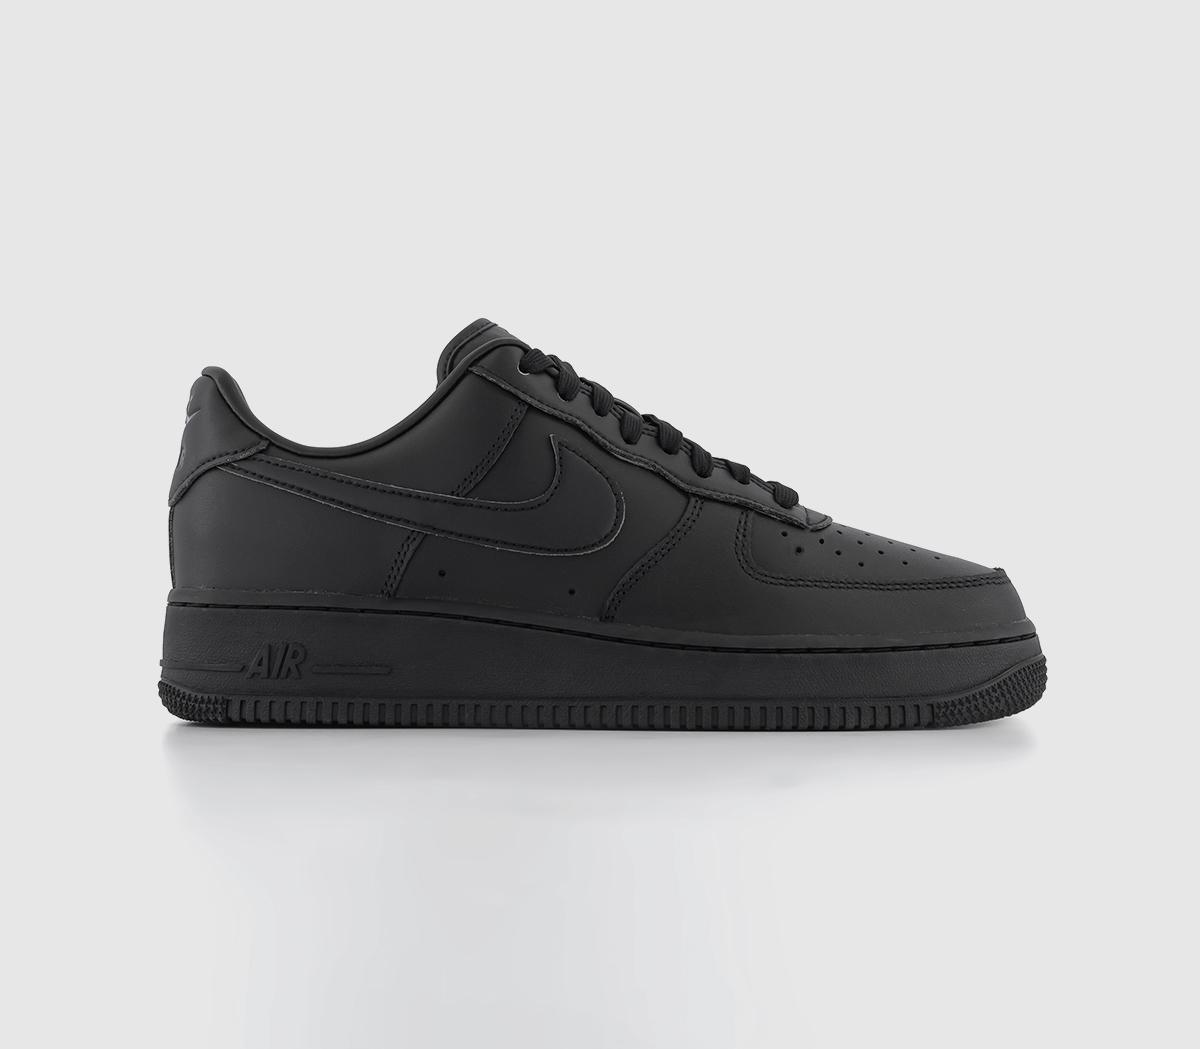 NikeAir Force 1 07 Trainers Black Anthracite Black